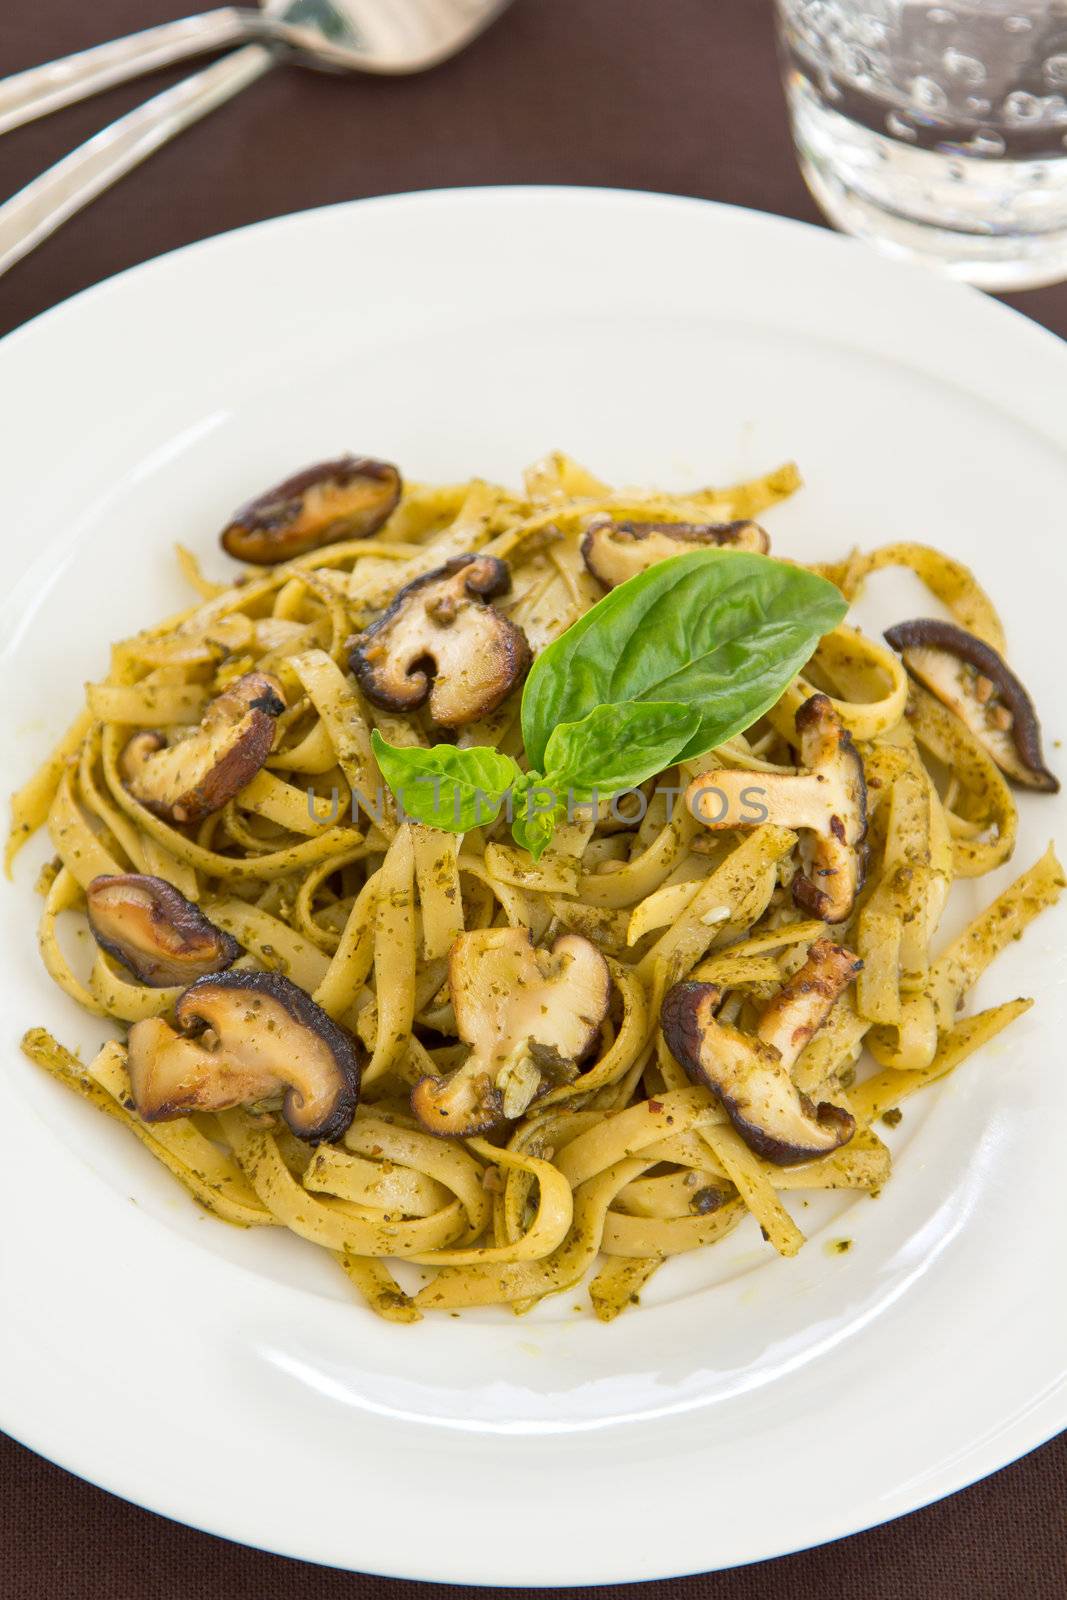 Fettuccine and mushroom with pesto sauce by vanillaechoes